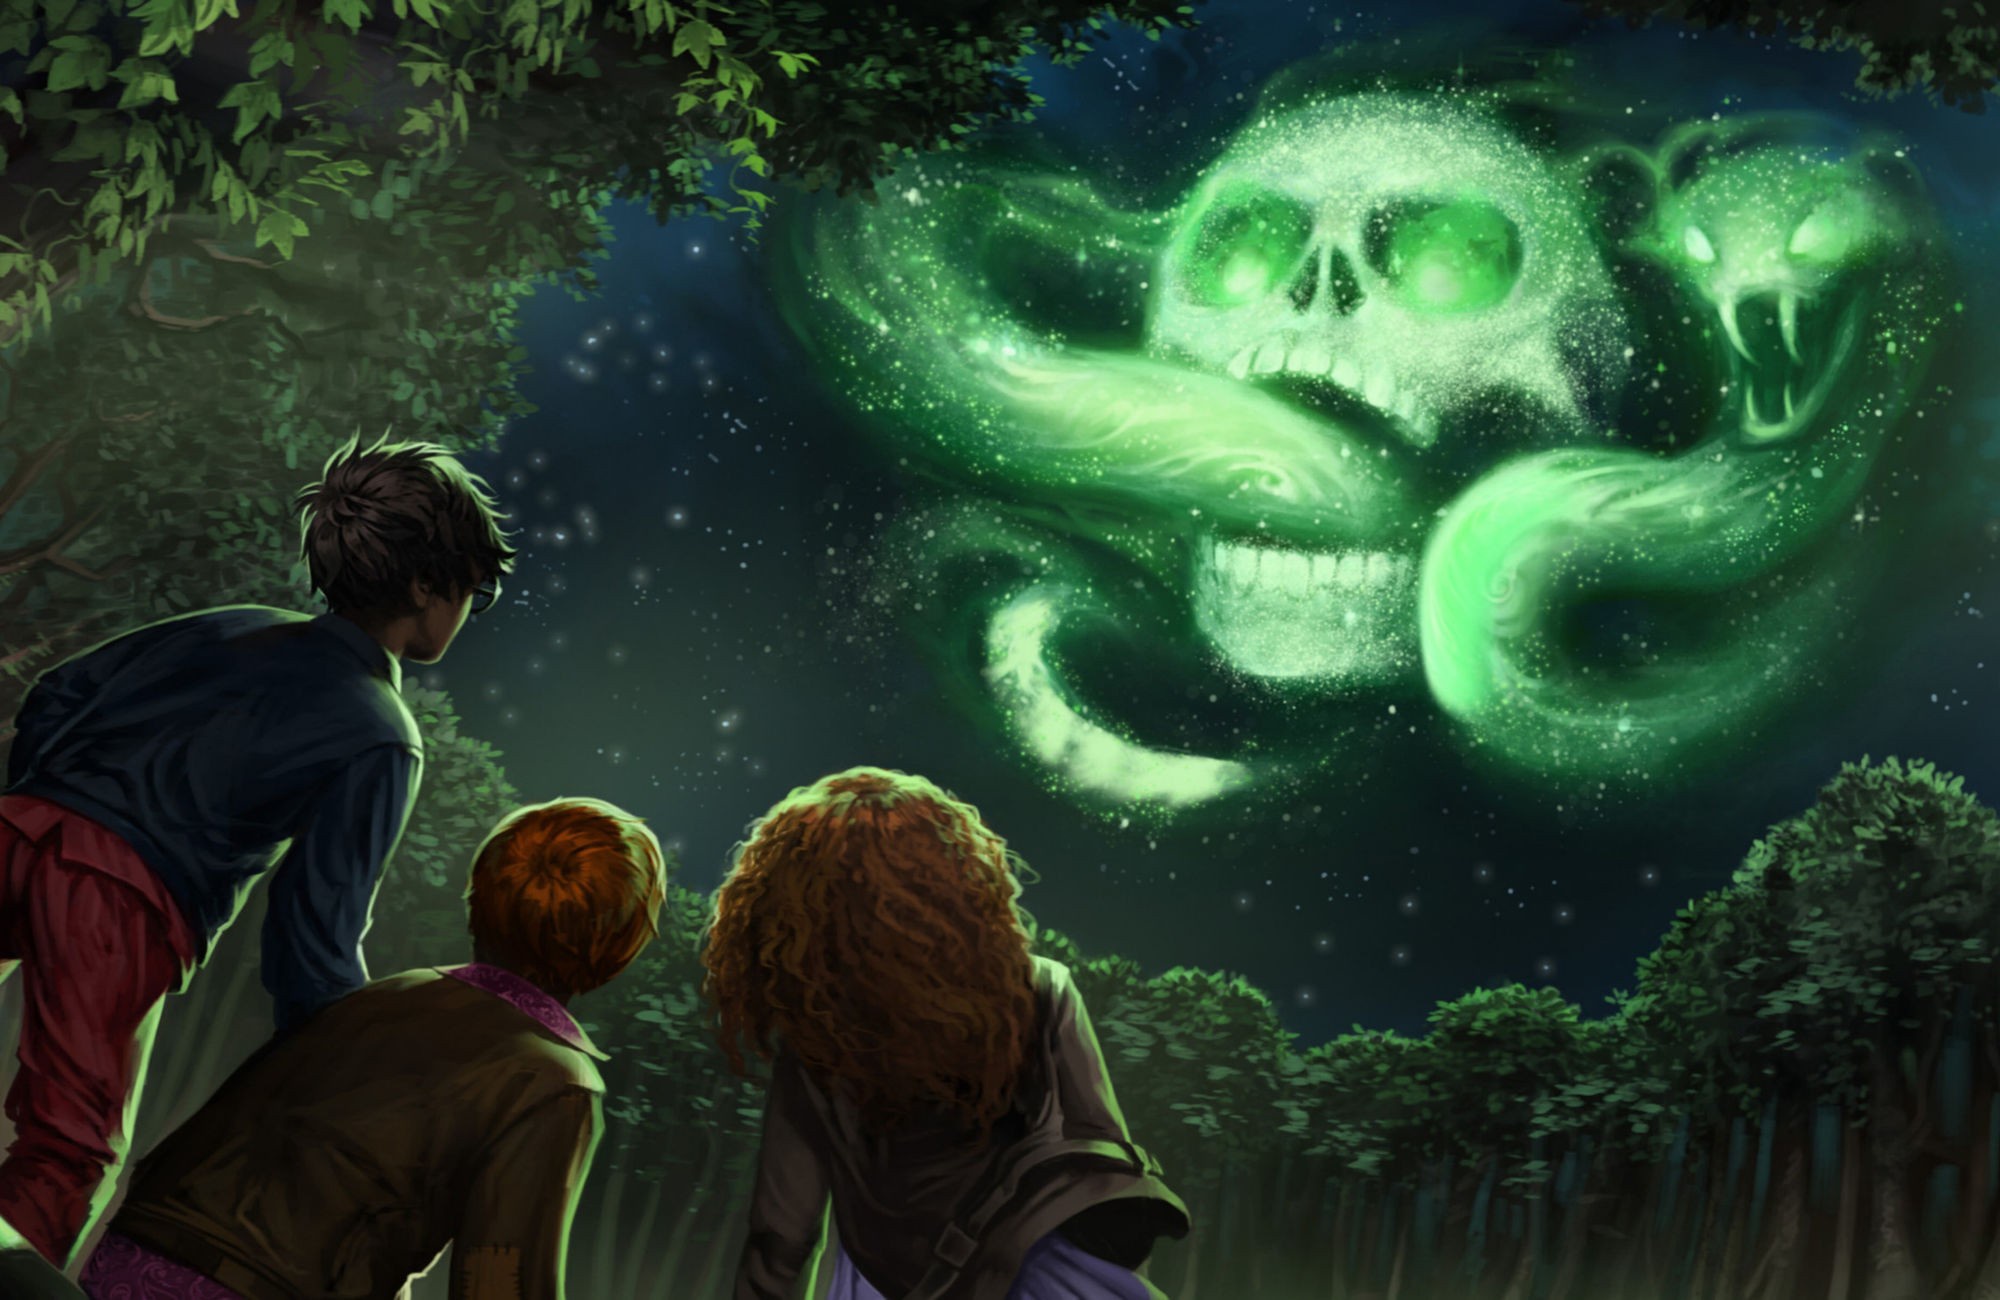 harry potter, movie, harry potter and the goblet of fire, hermione granger, night, ron weasley, skull, sky, snake